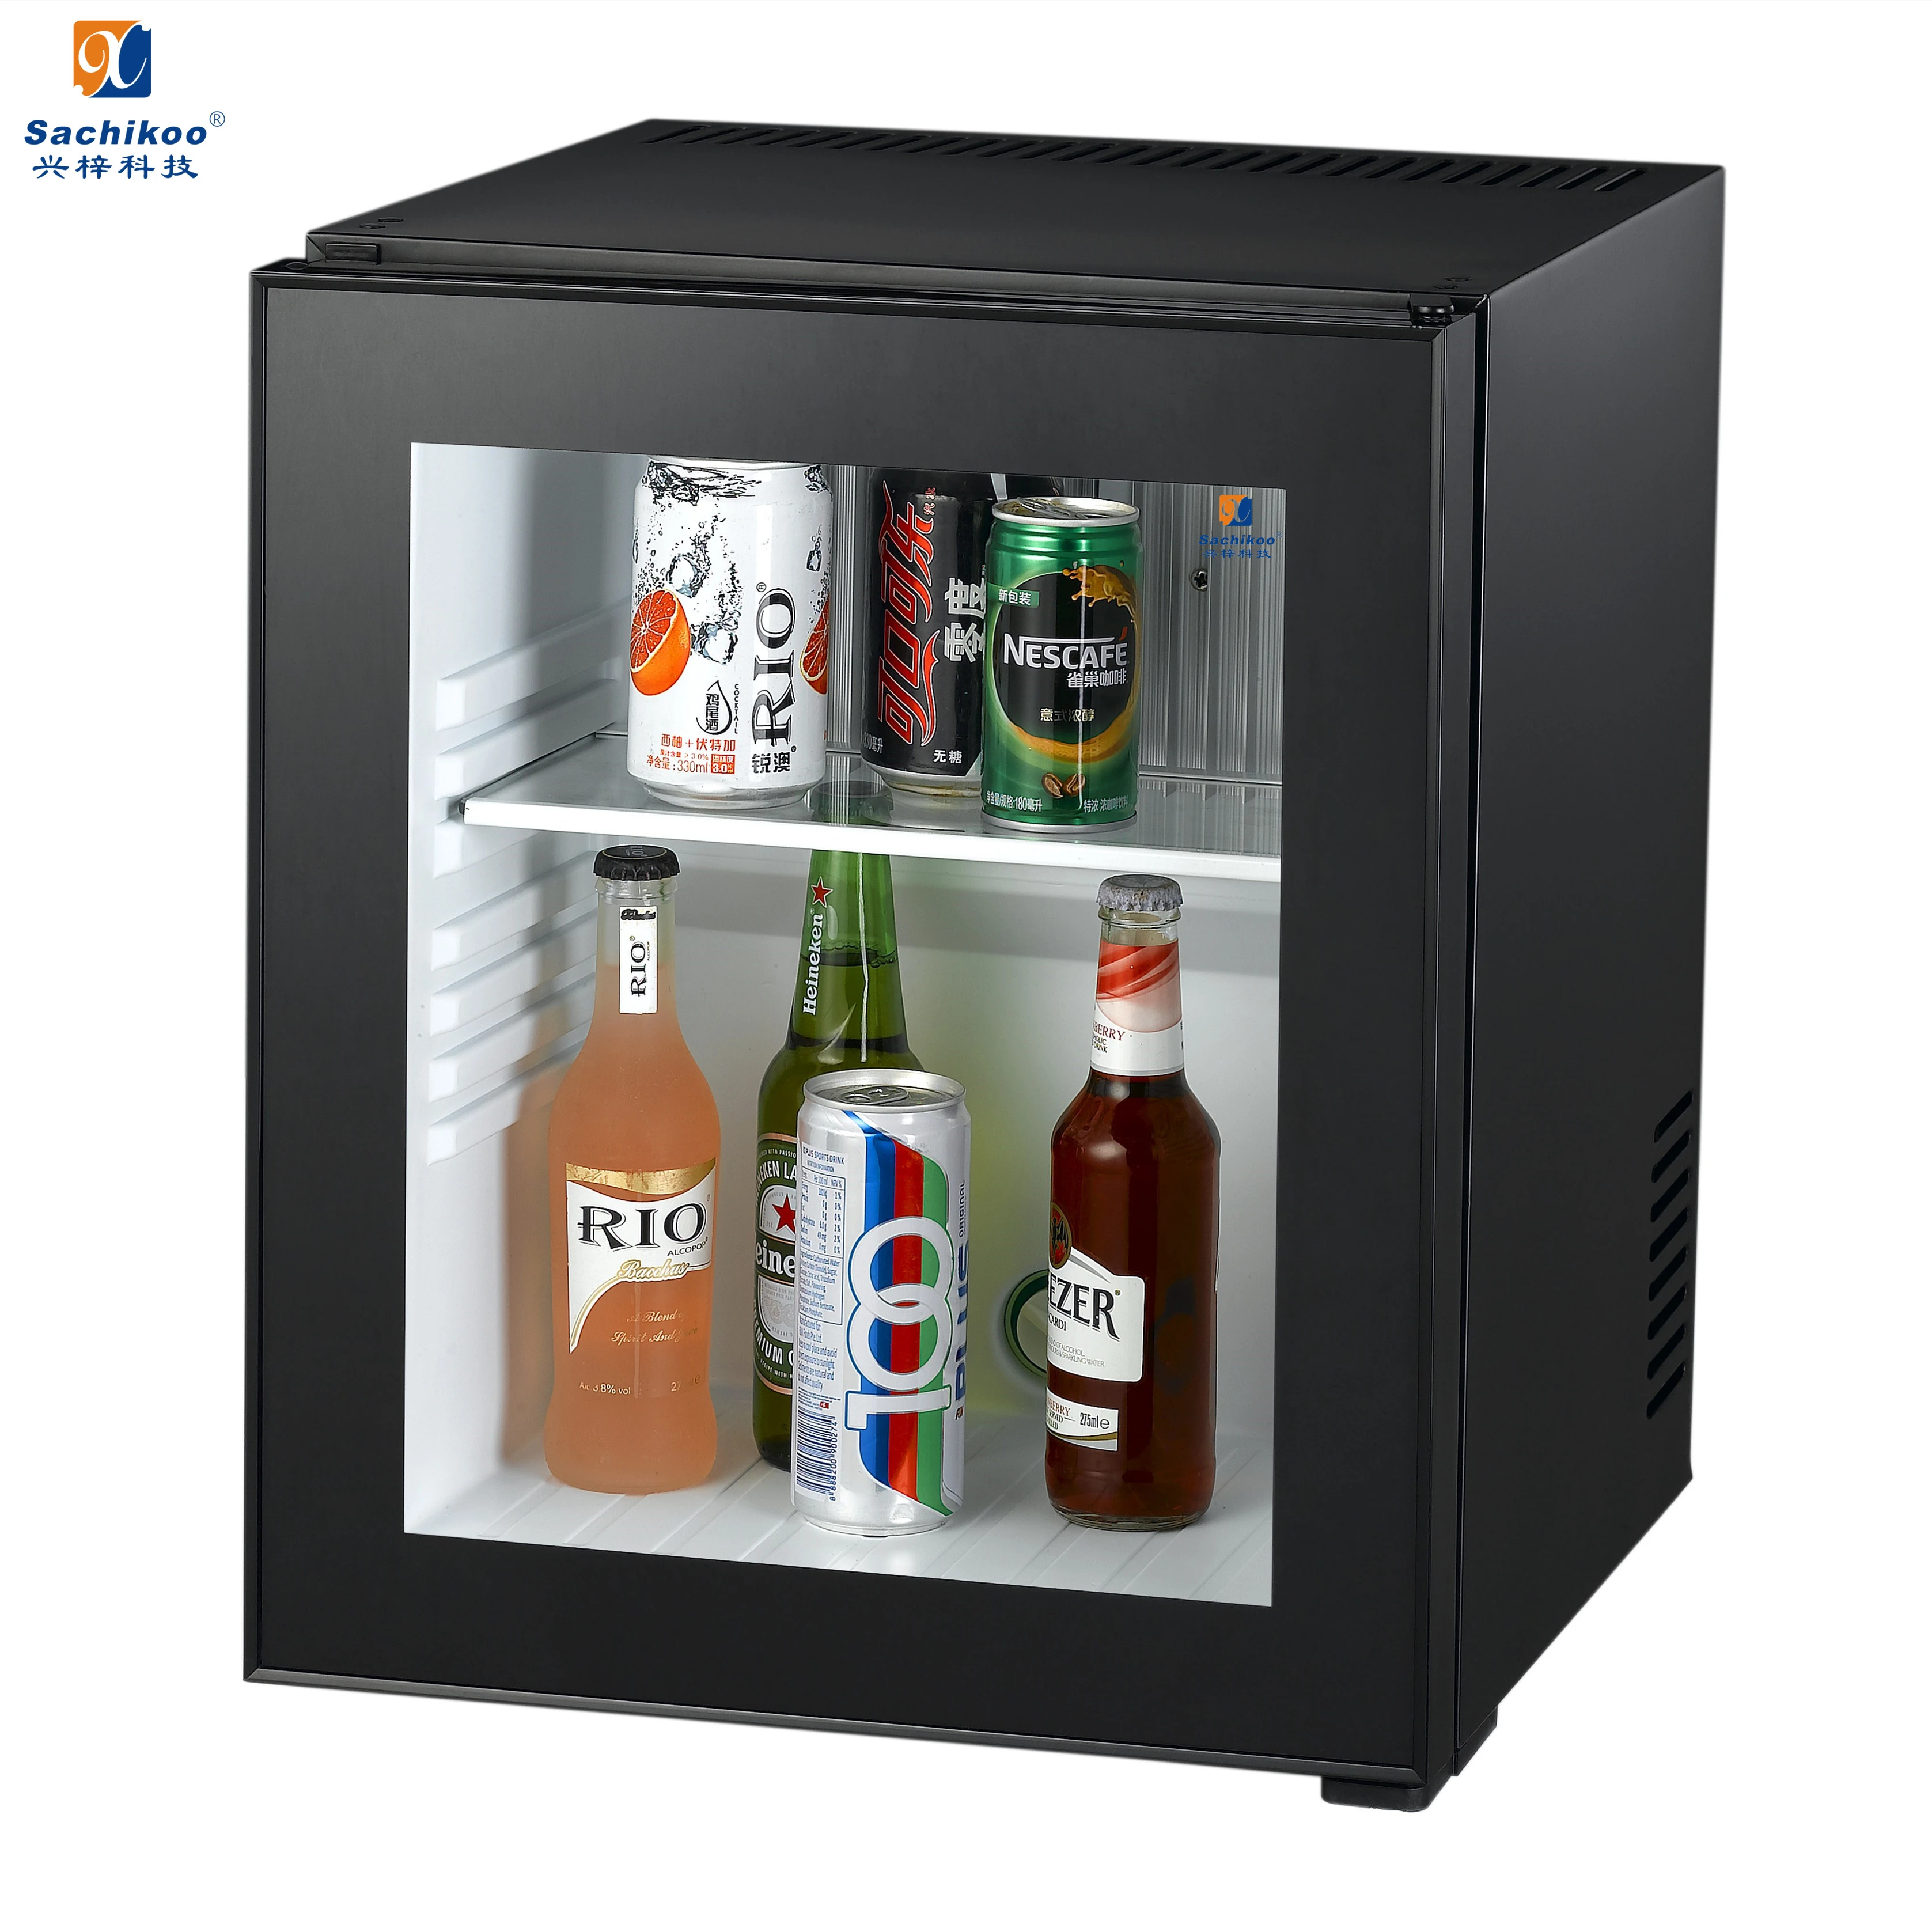 30 liter No noise freon-free absorption mini bar refrigerator with glass door for hotel